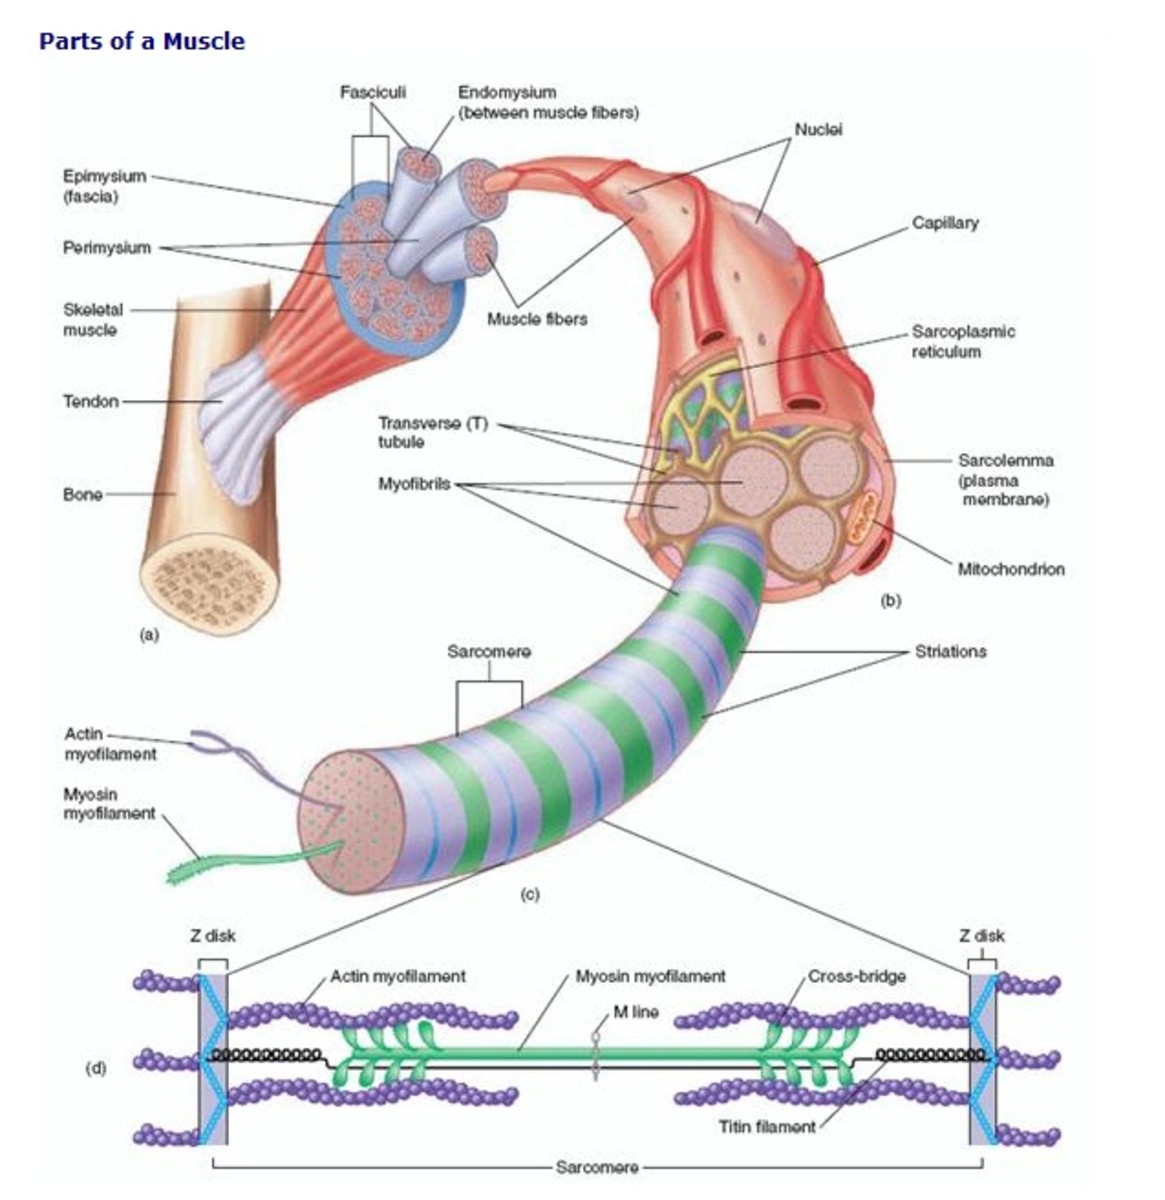 Parts of a muscle